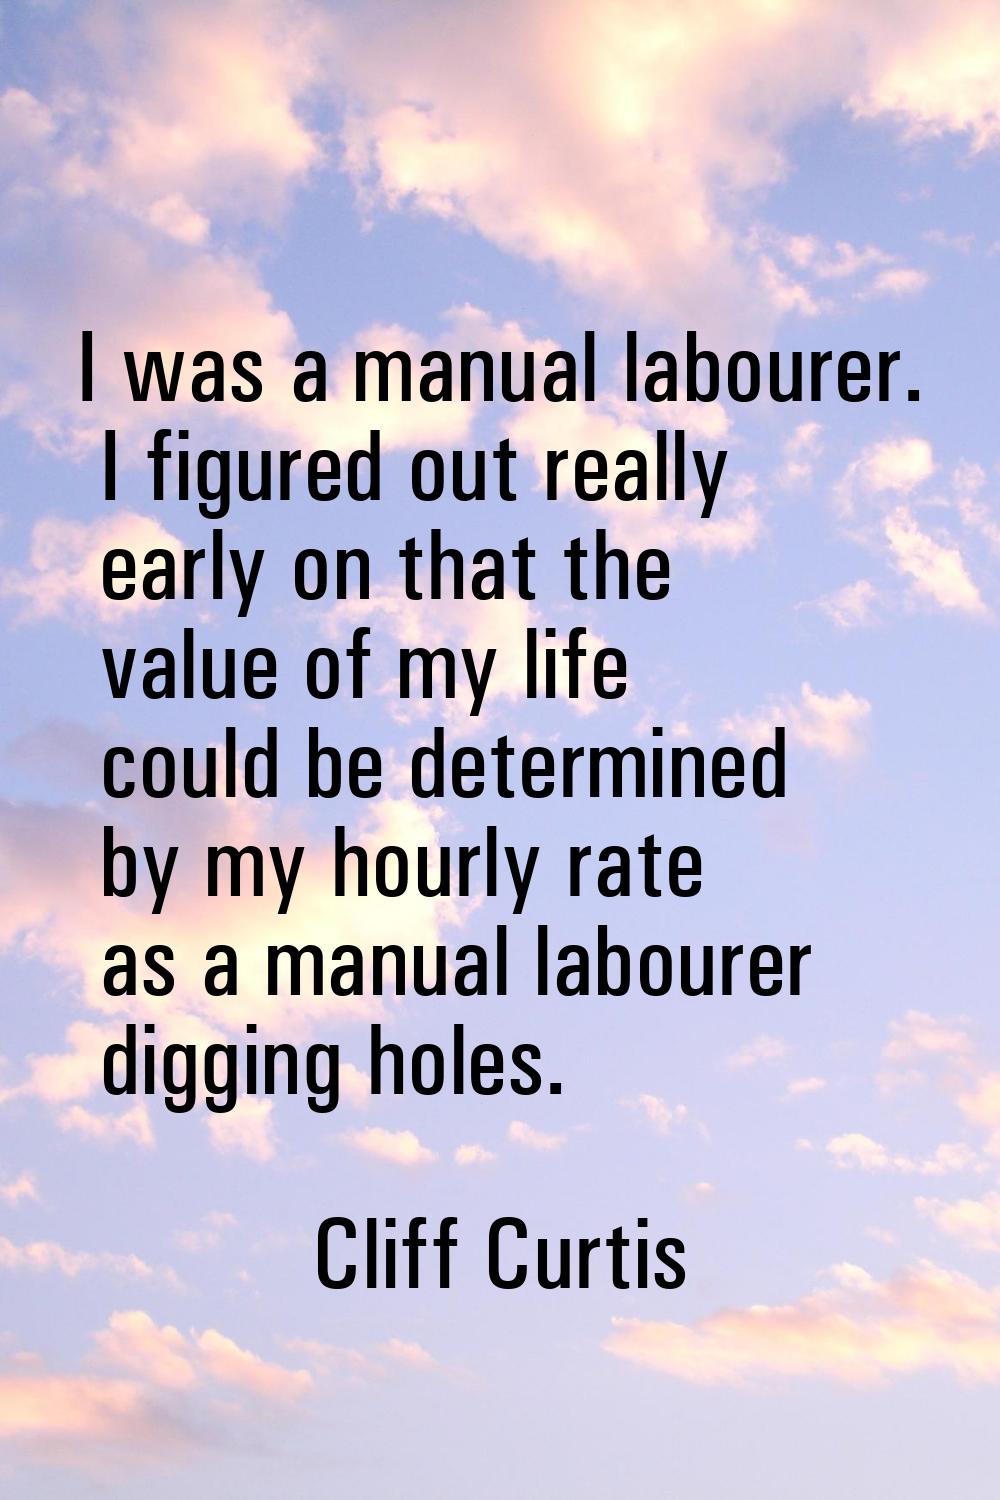 I was a manual labourer. I figured out really early on that the value of my life could be determine